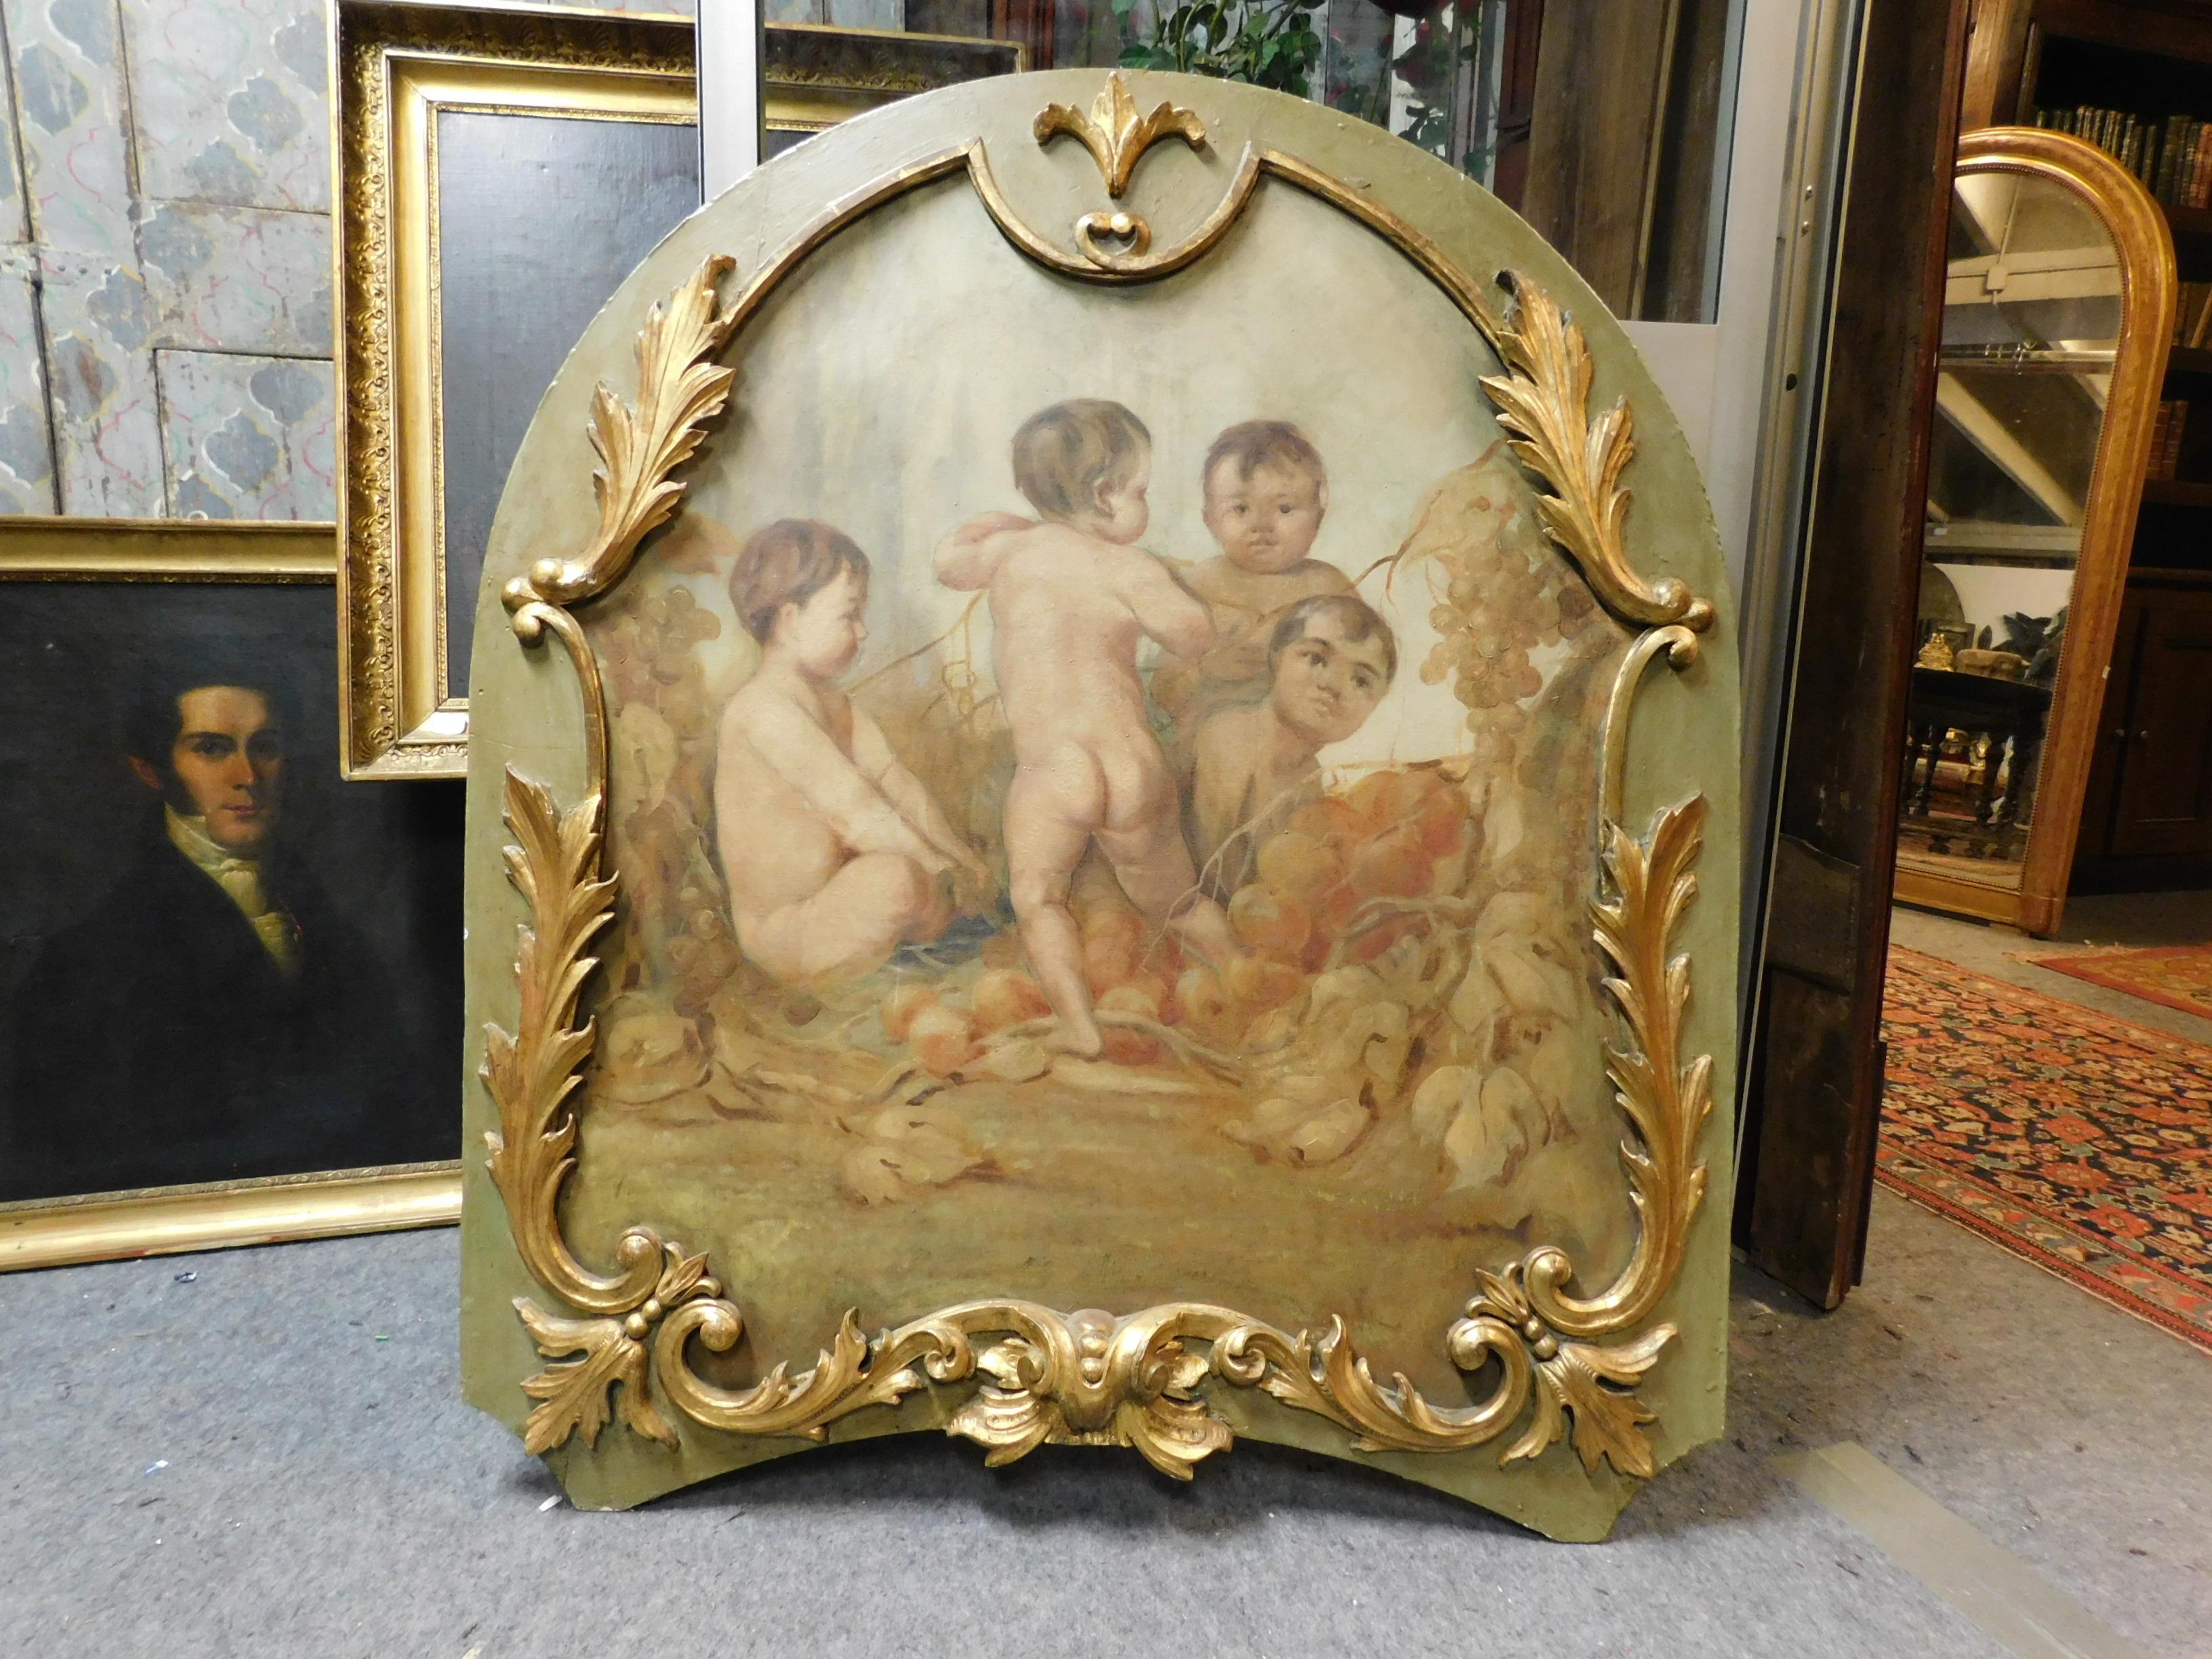 Hand-Painted Antique Painted Panel with Golden Frame, Italy, 18th Century